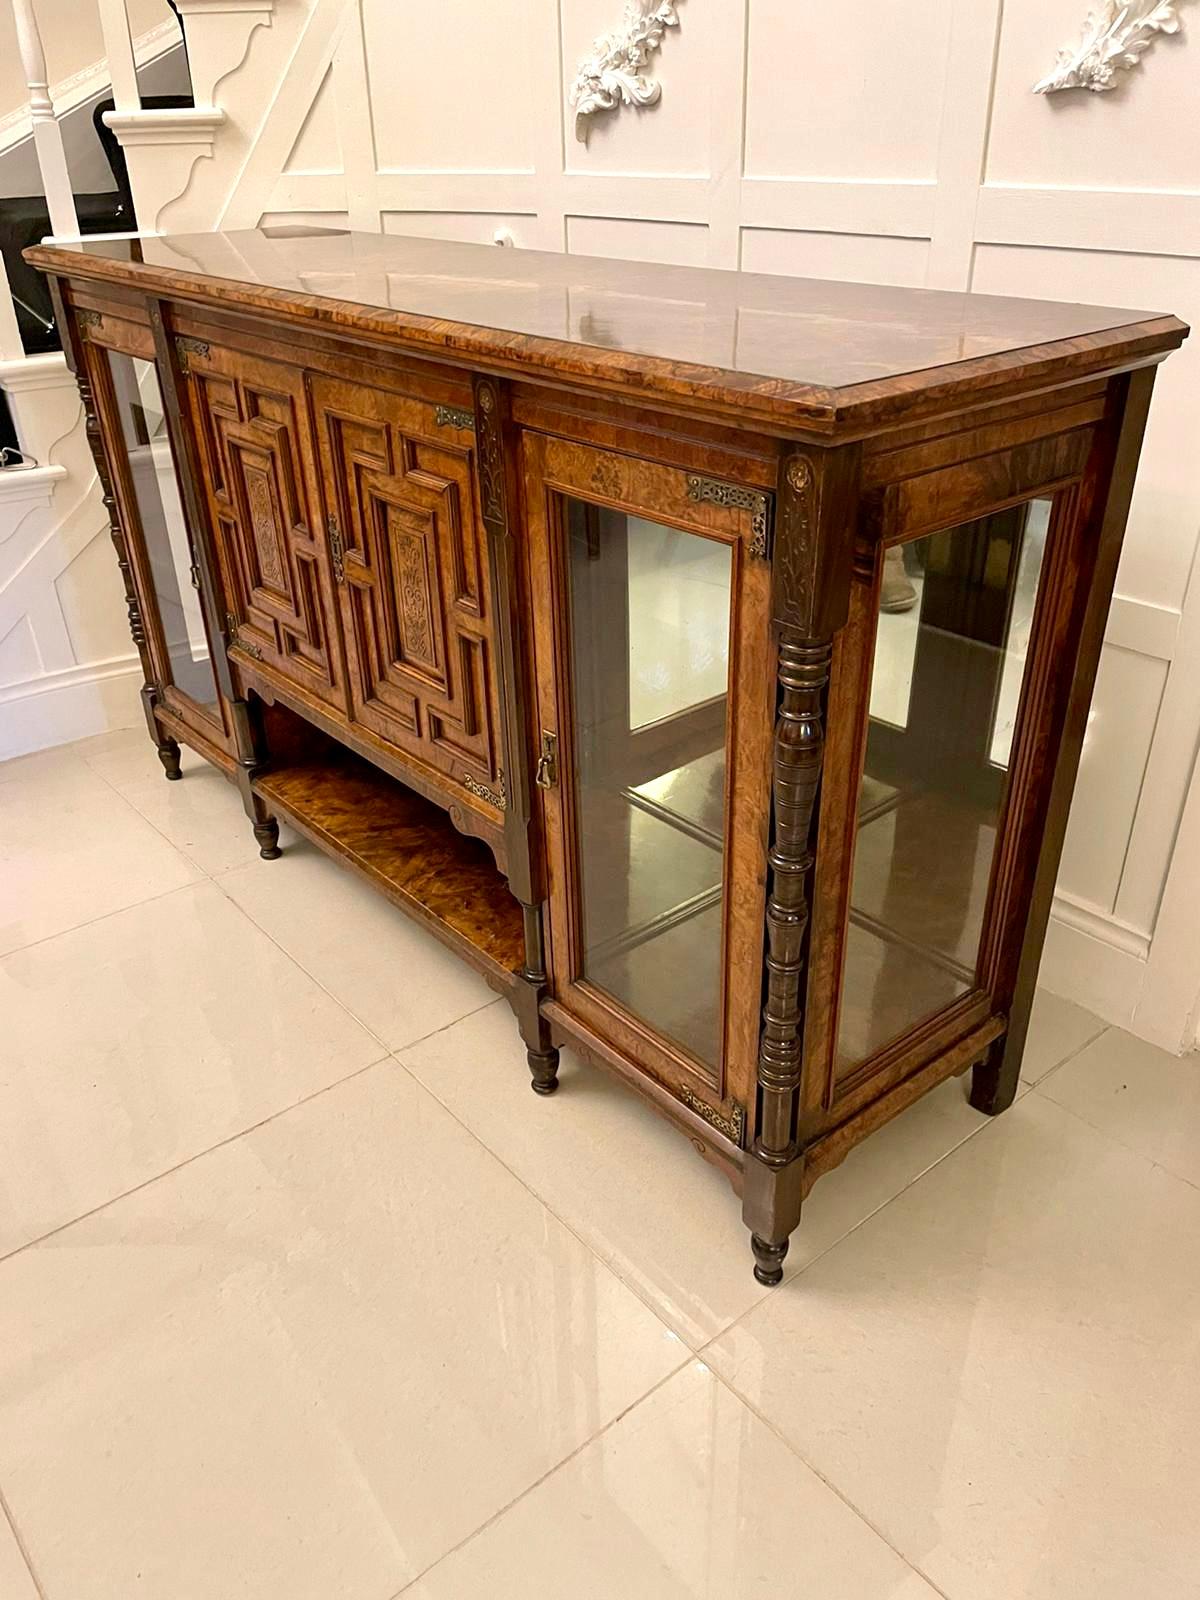 Outstanding quality antique Victorian burr walnut credenza having an outstanding quality burr walnut top with moulded edge. It boasts a stunning pair of walnut moulded panelled and carved doors to the centre with original ornate brass hinges, the